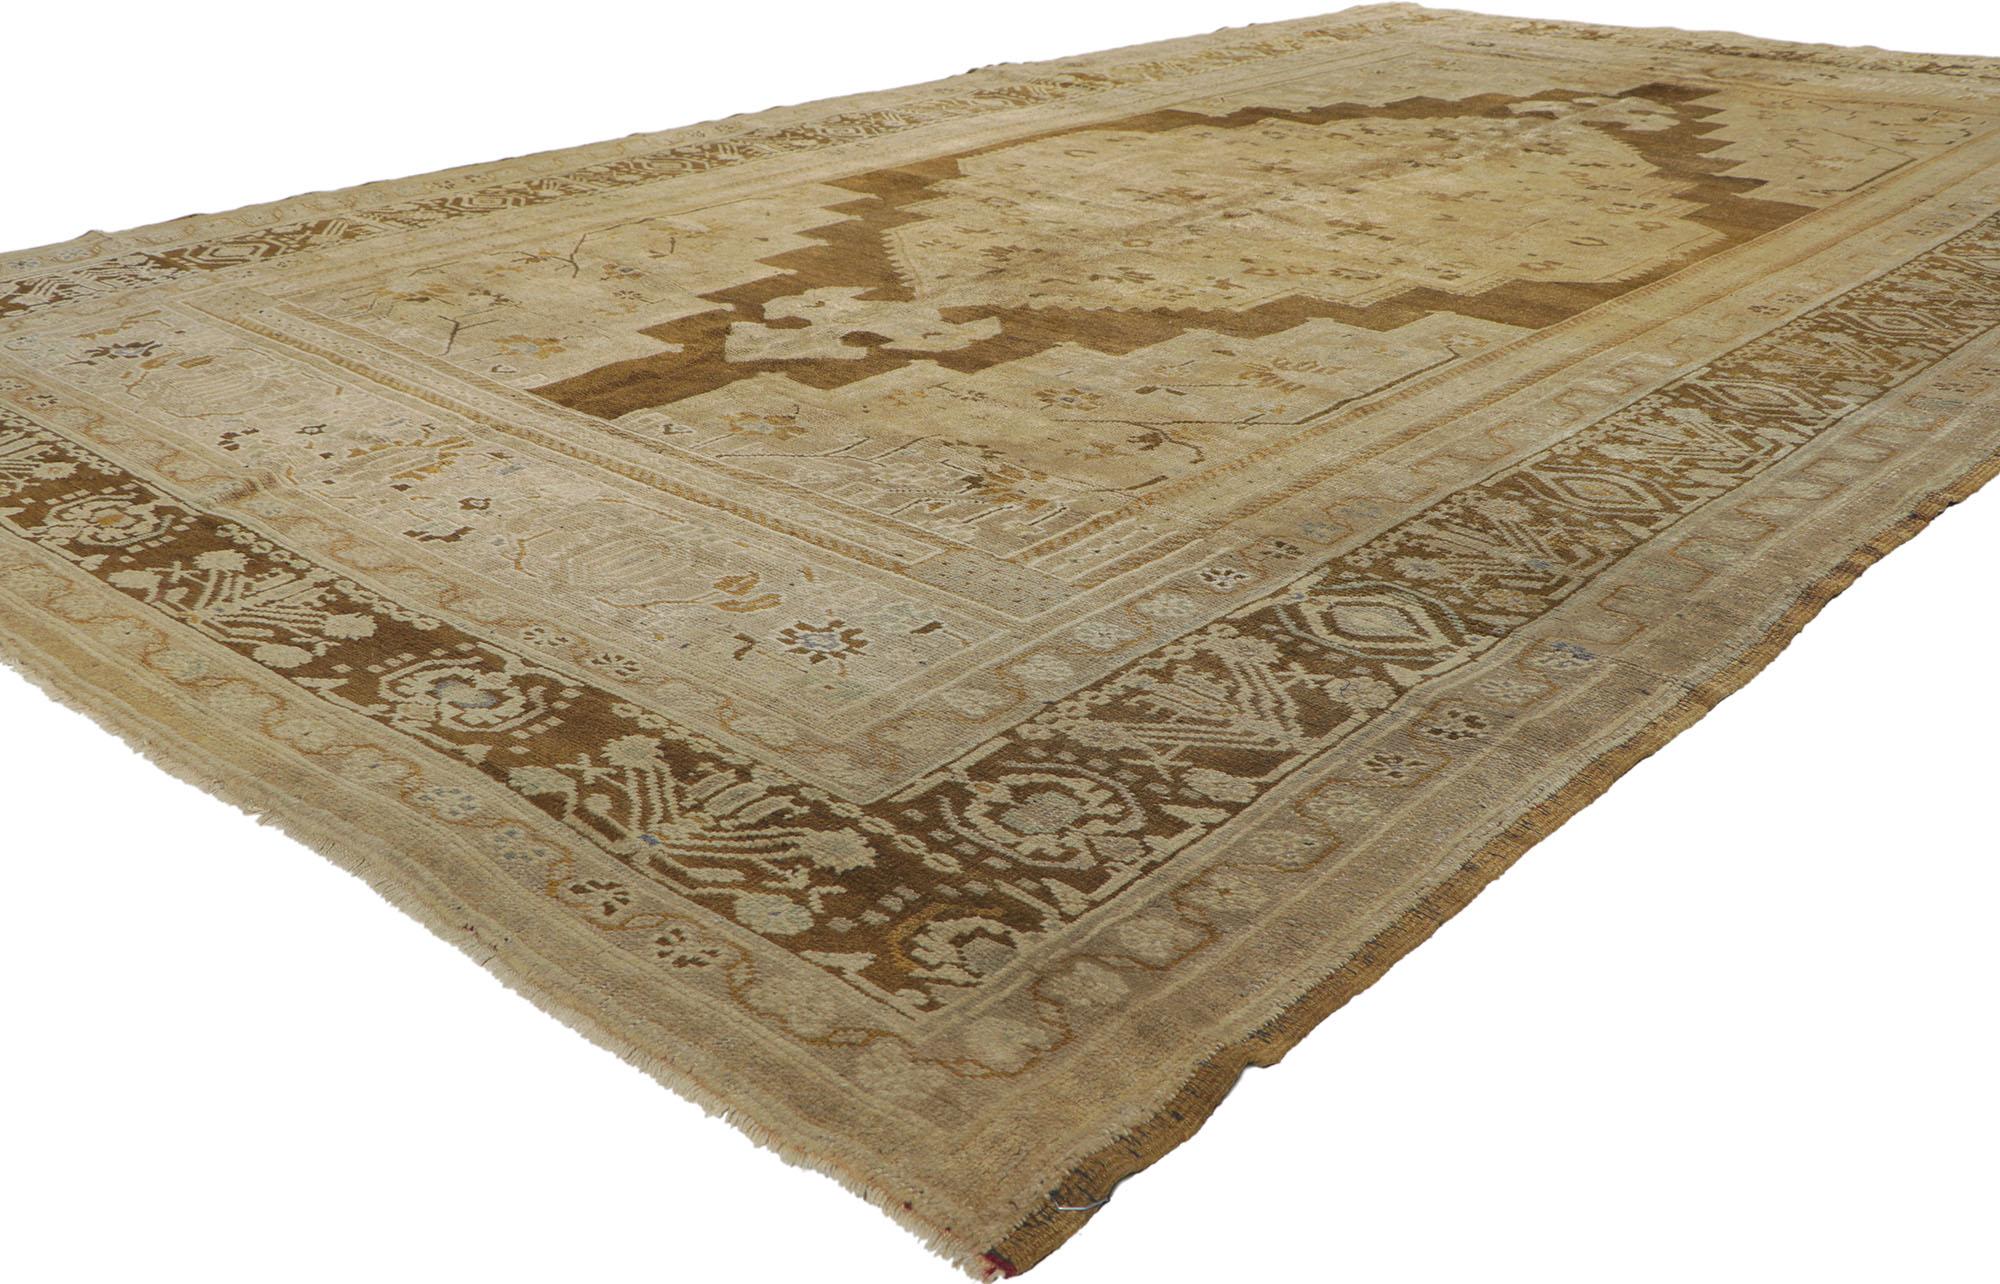 73946, Vintage Turkish Oushak Gallery Rug 07'00 x 12'00. Emanating timeless appeal, effortless beauty and neutral hues, this hand knotted wool vintage Turkish Oushak gallery rug is poised to impress. The antique washed cut-out field features a